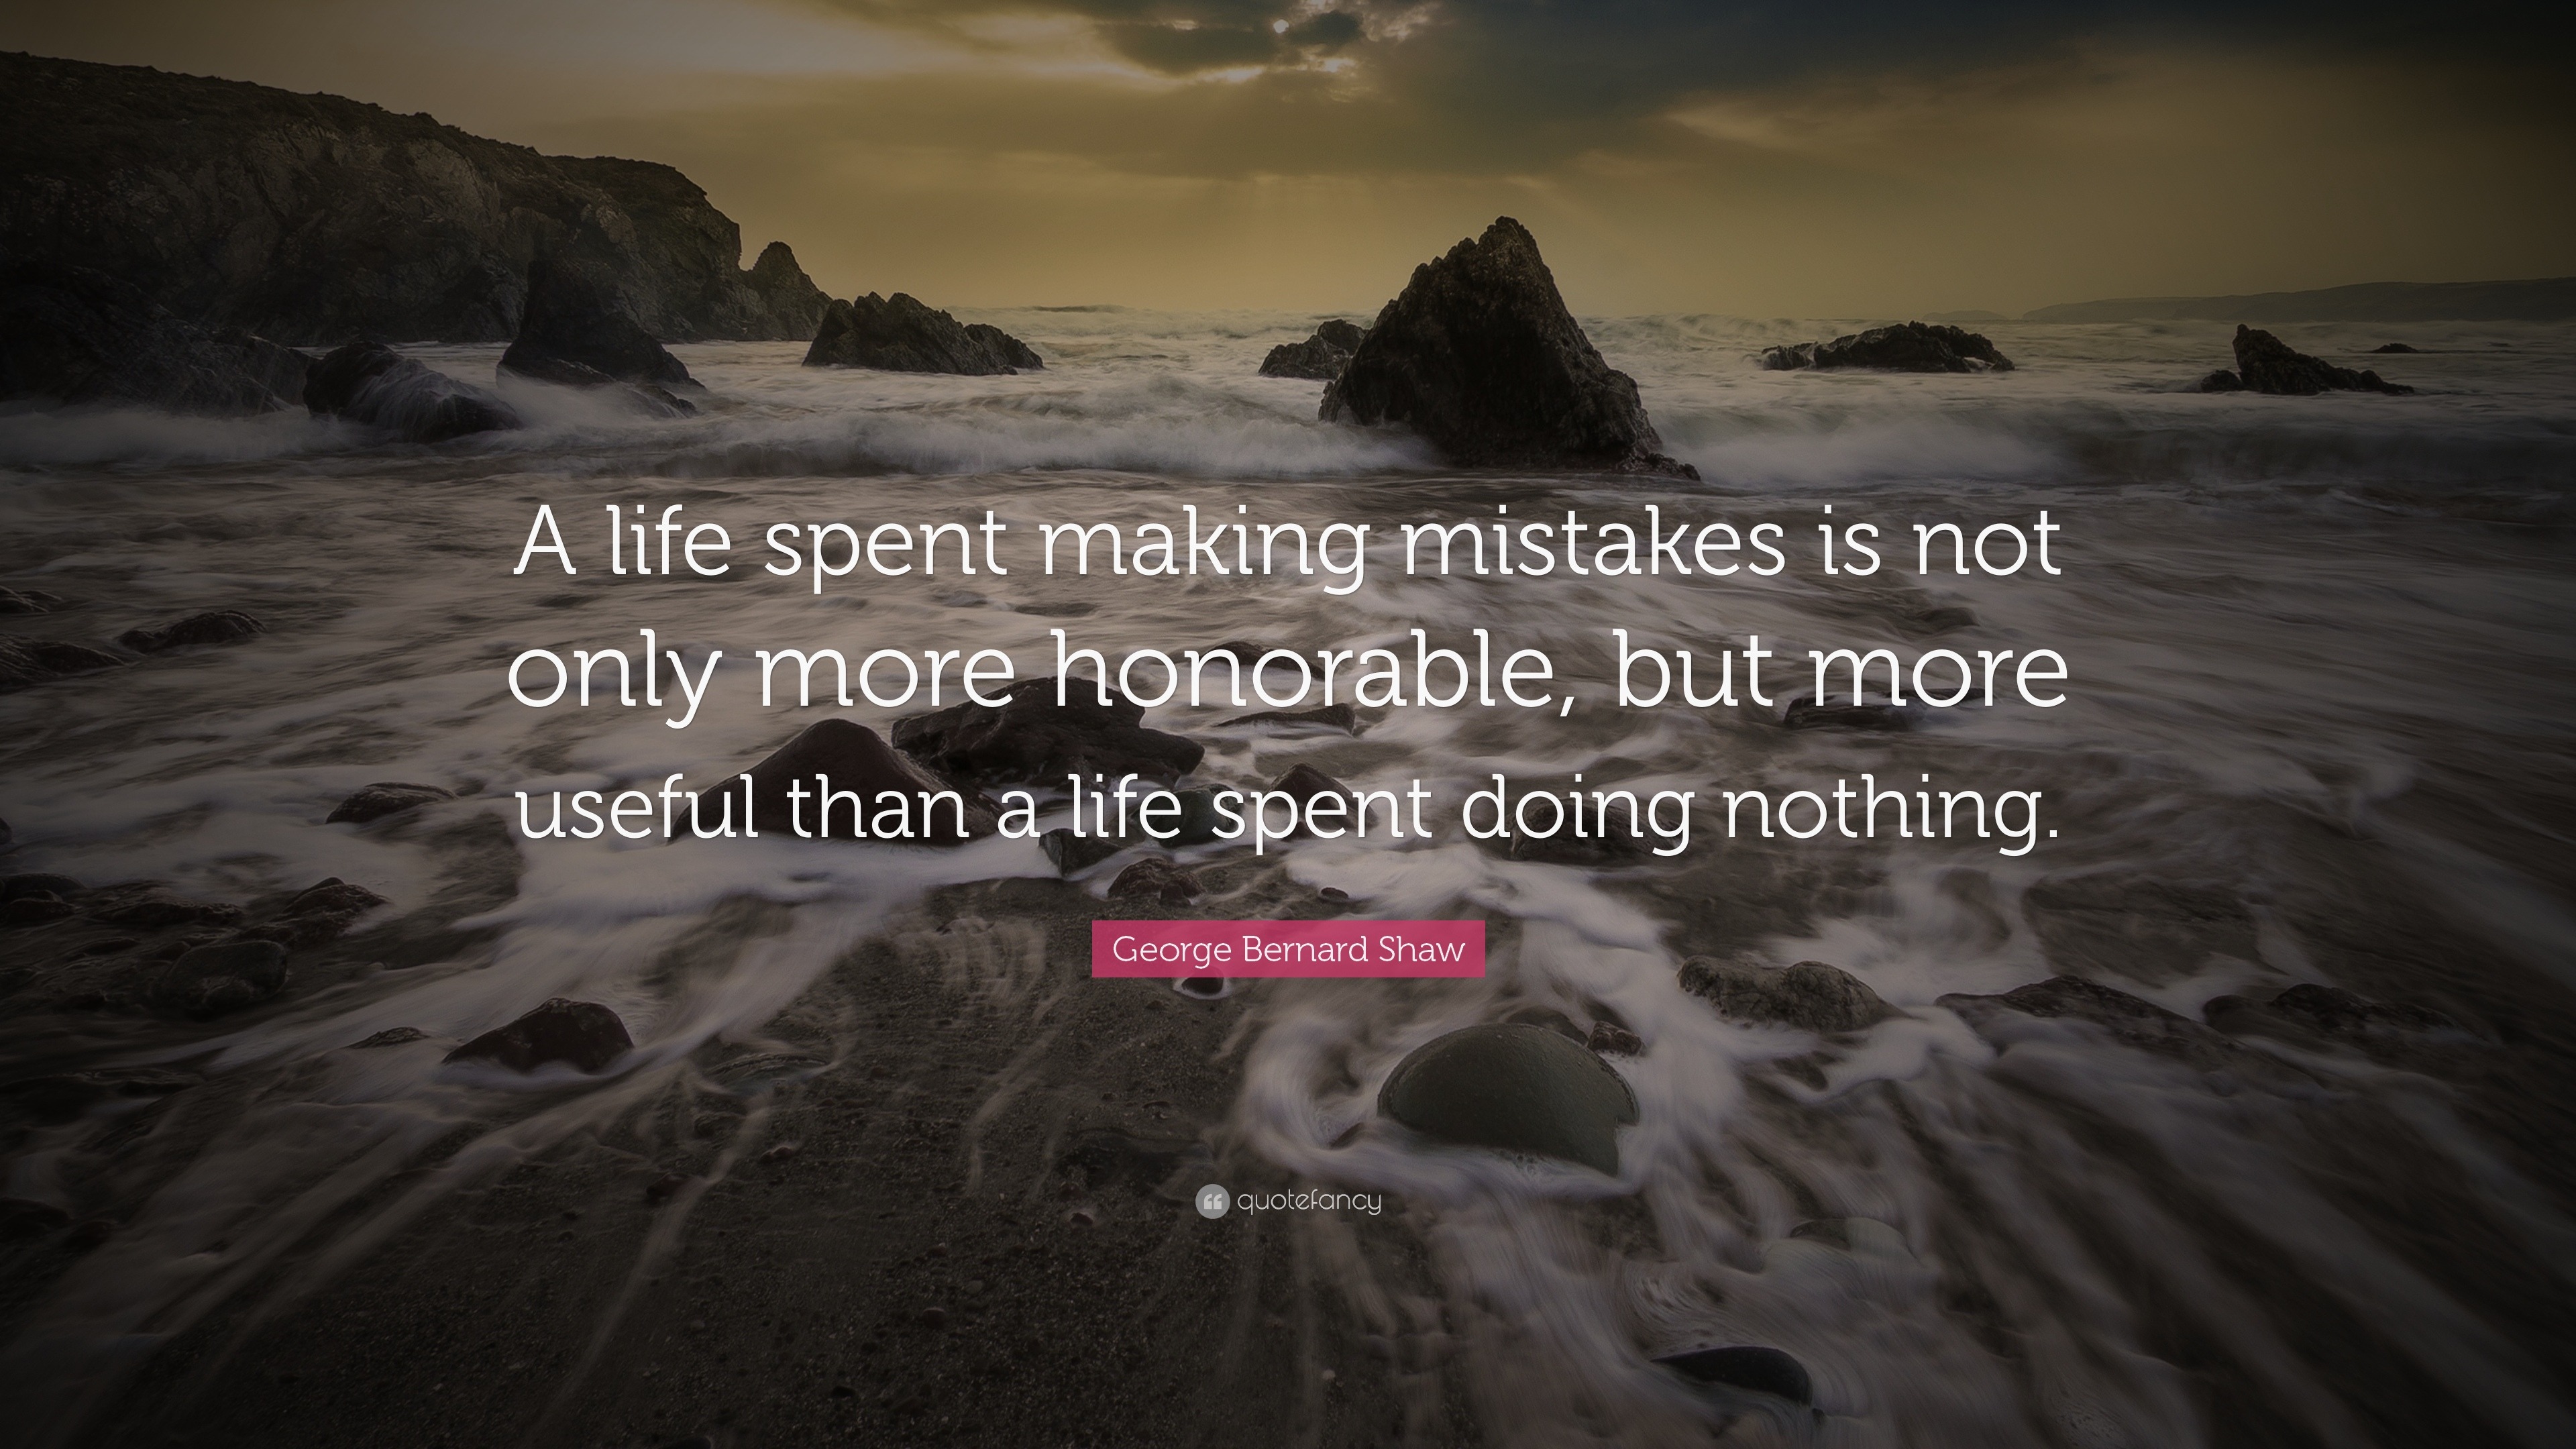 Learning Quotes “A life spent making mistakes is not only more honorable but